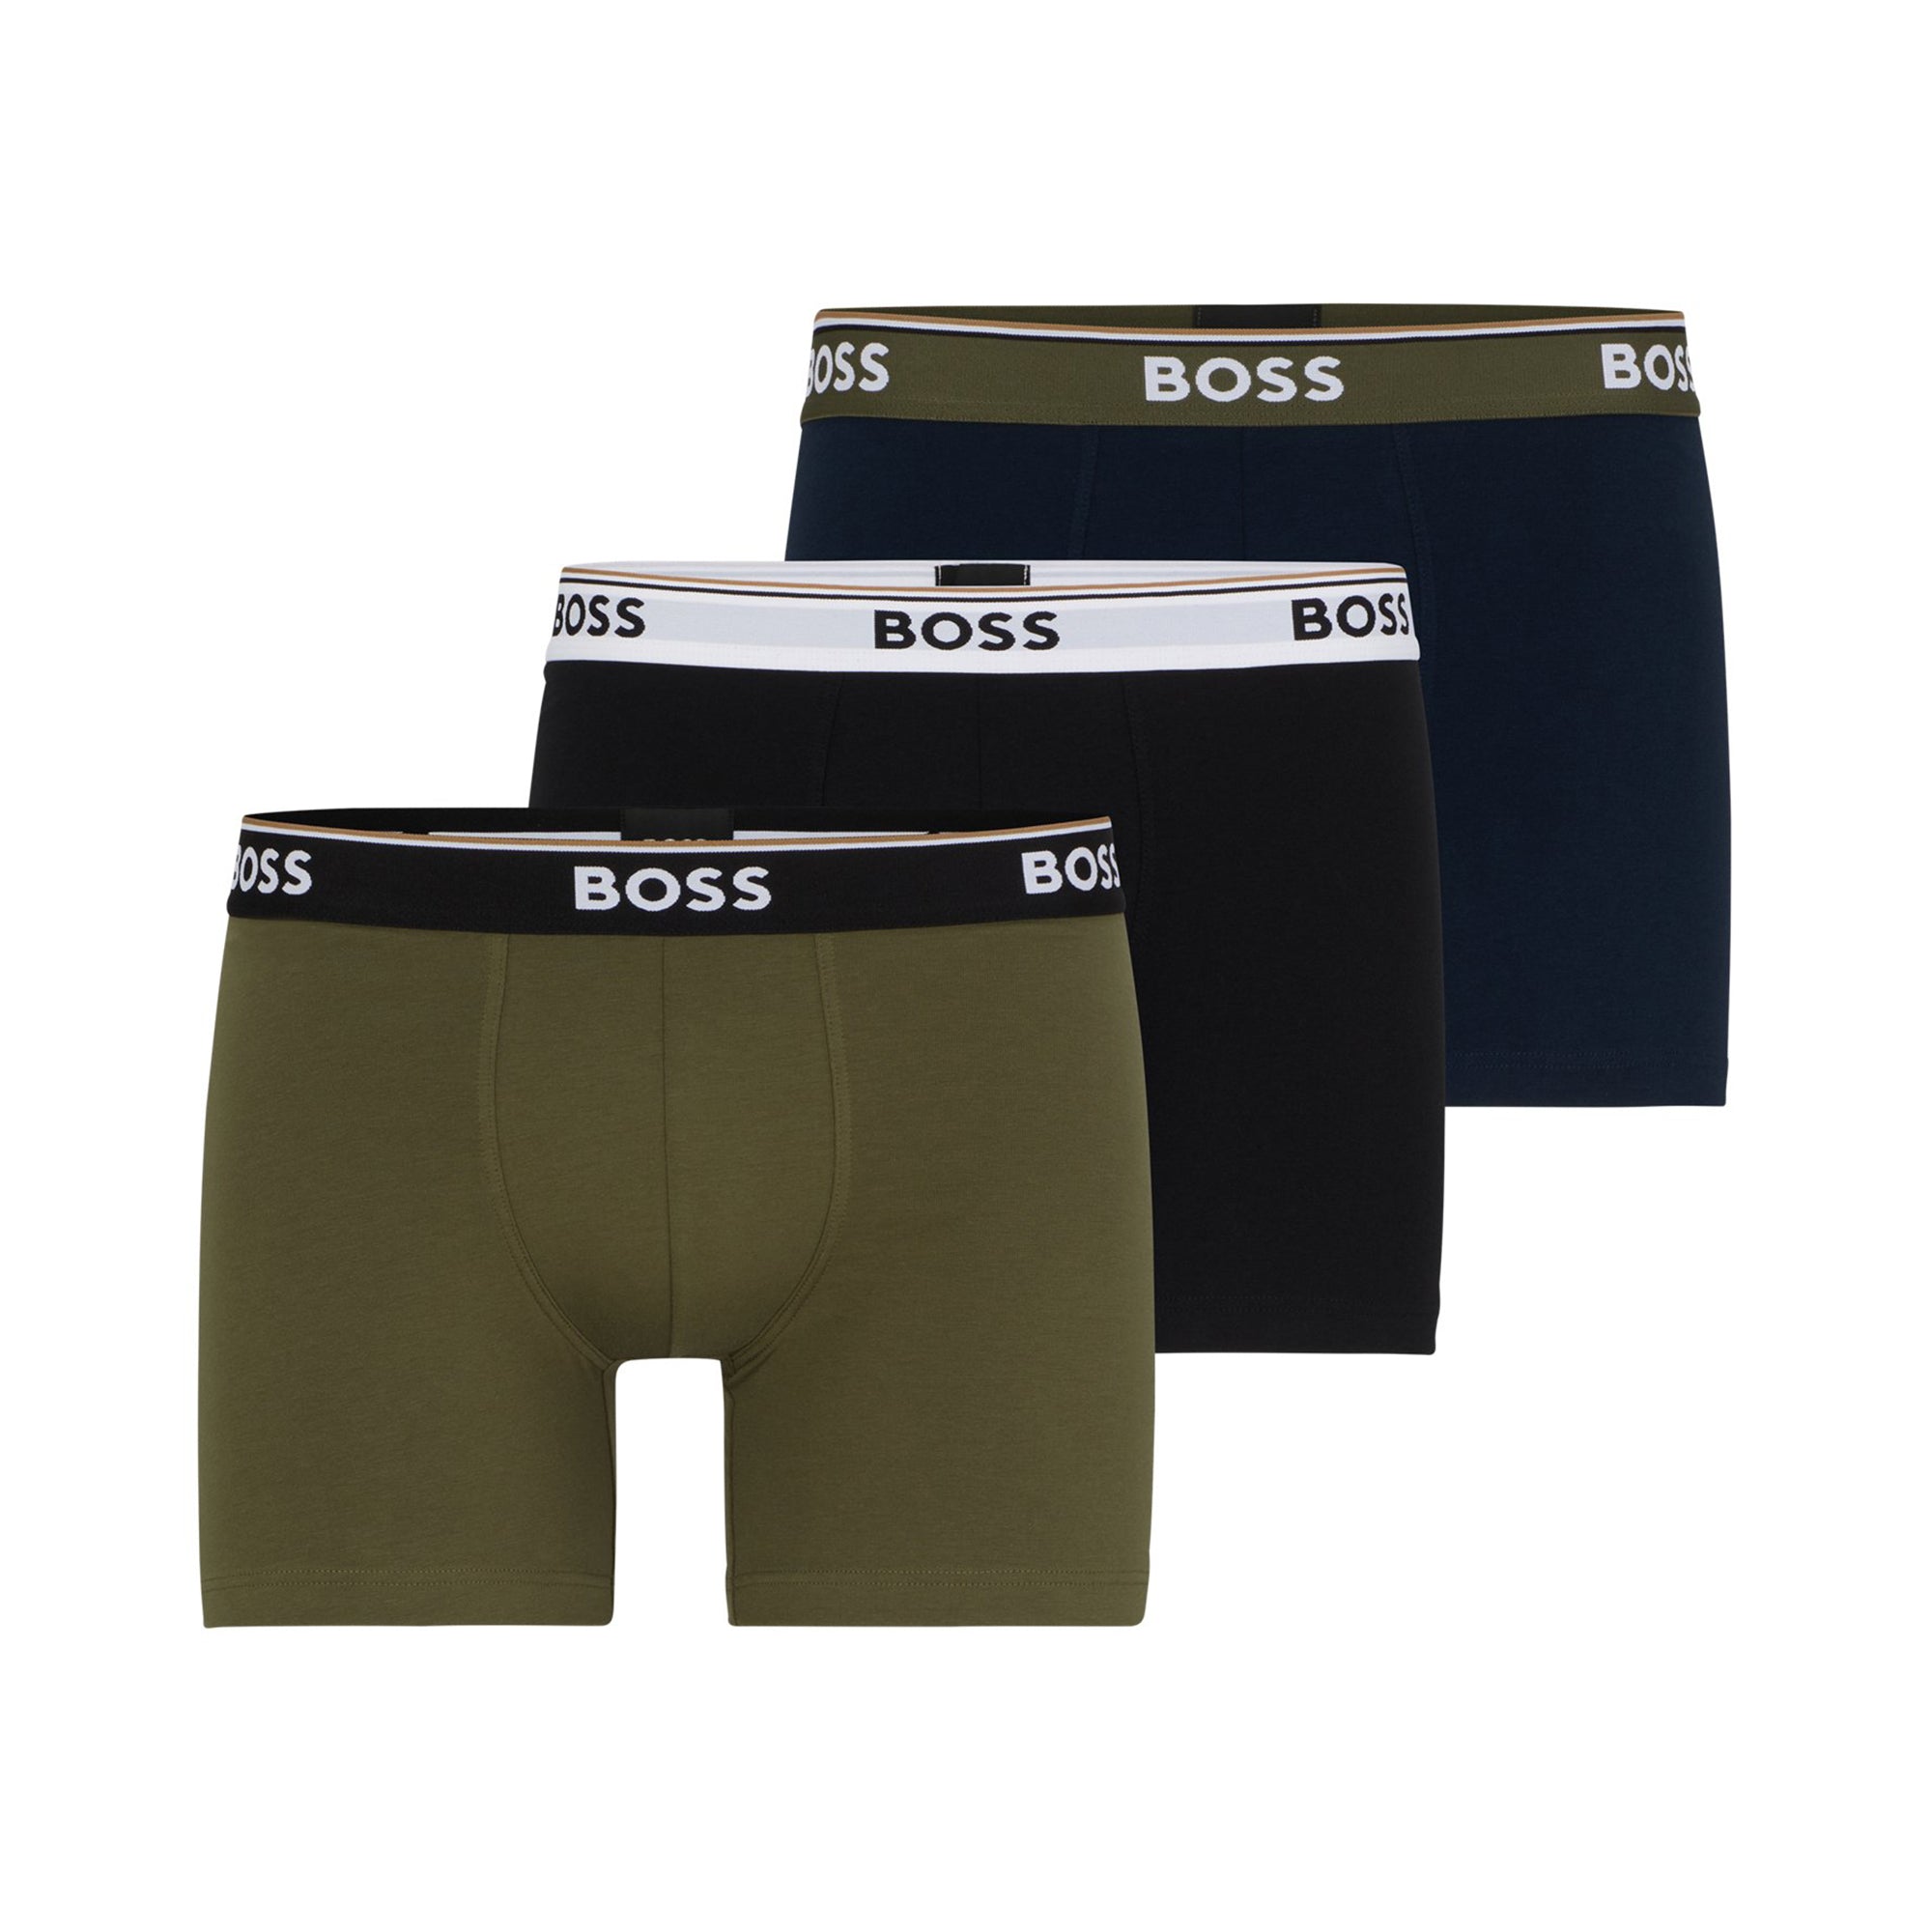 BOSS Power Boxer Brief 3-Pack 50495425 Multi 983 | Function18